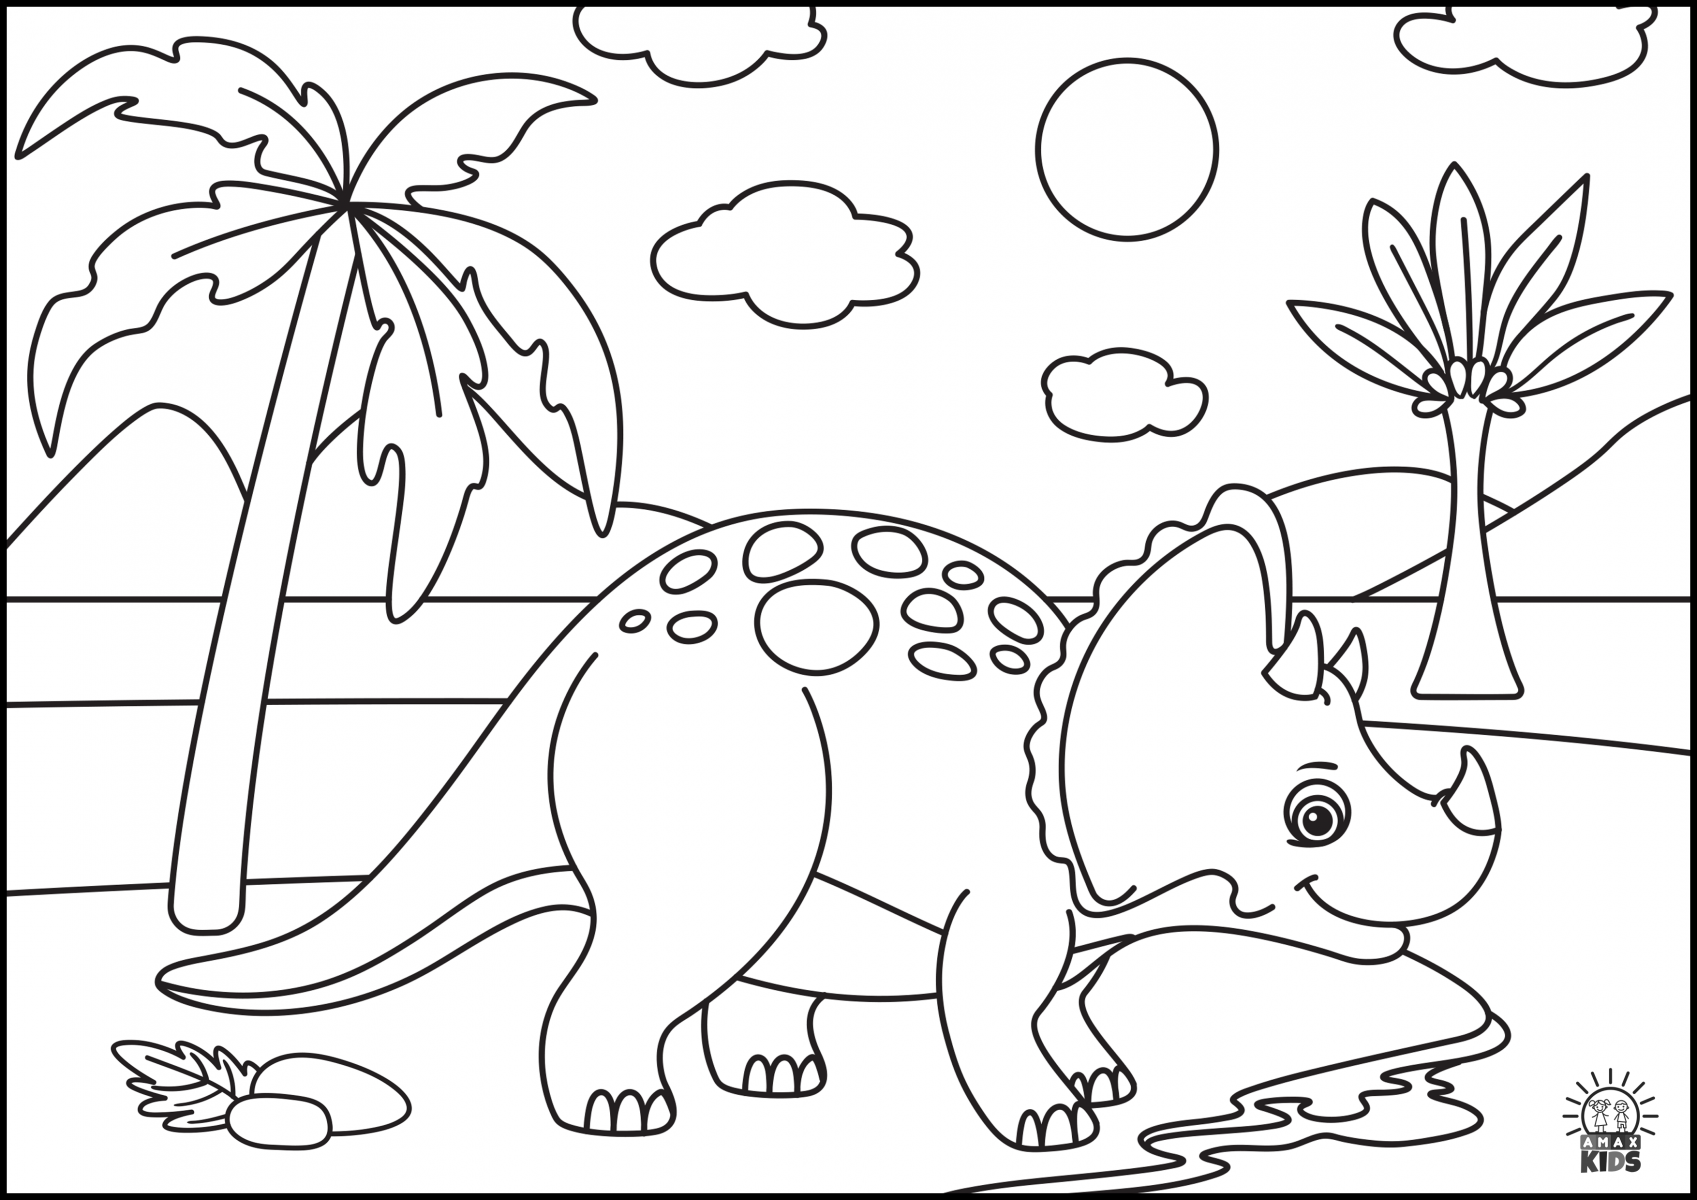 Coloring pages for kids with dinosaurs | Amax Kids